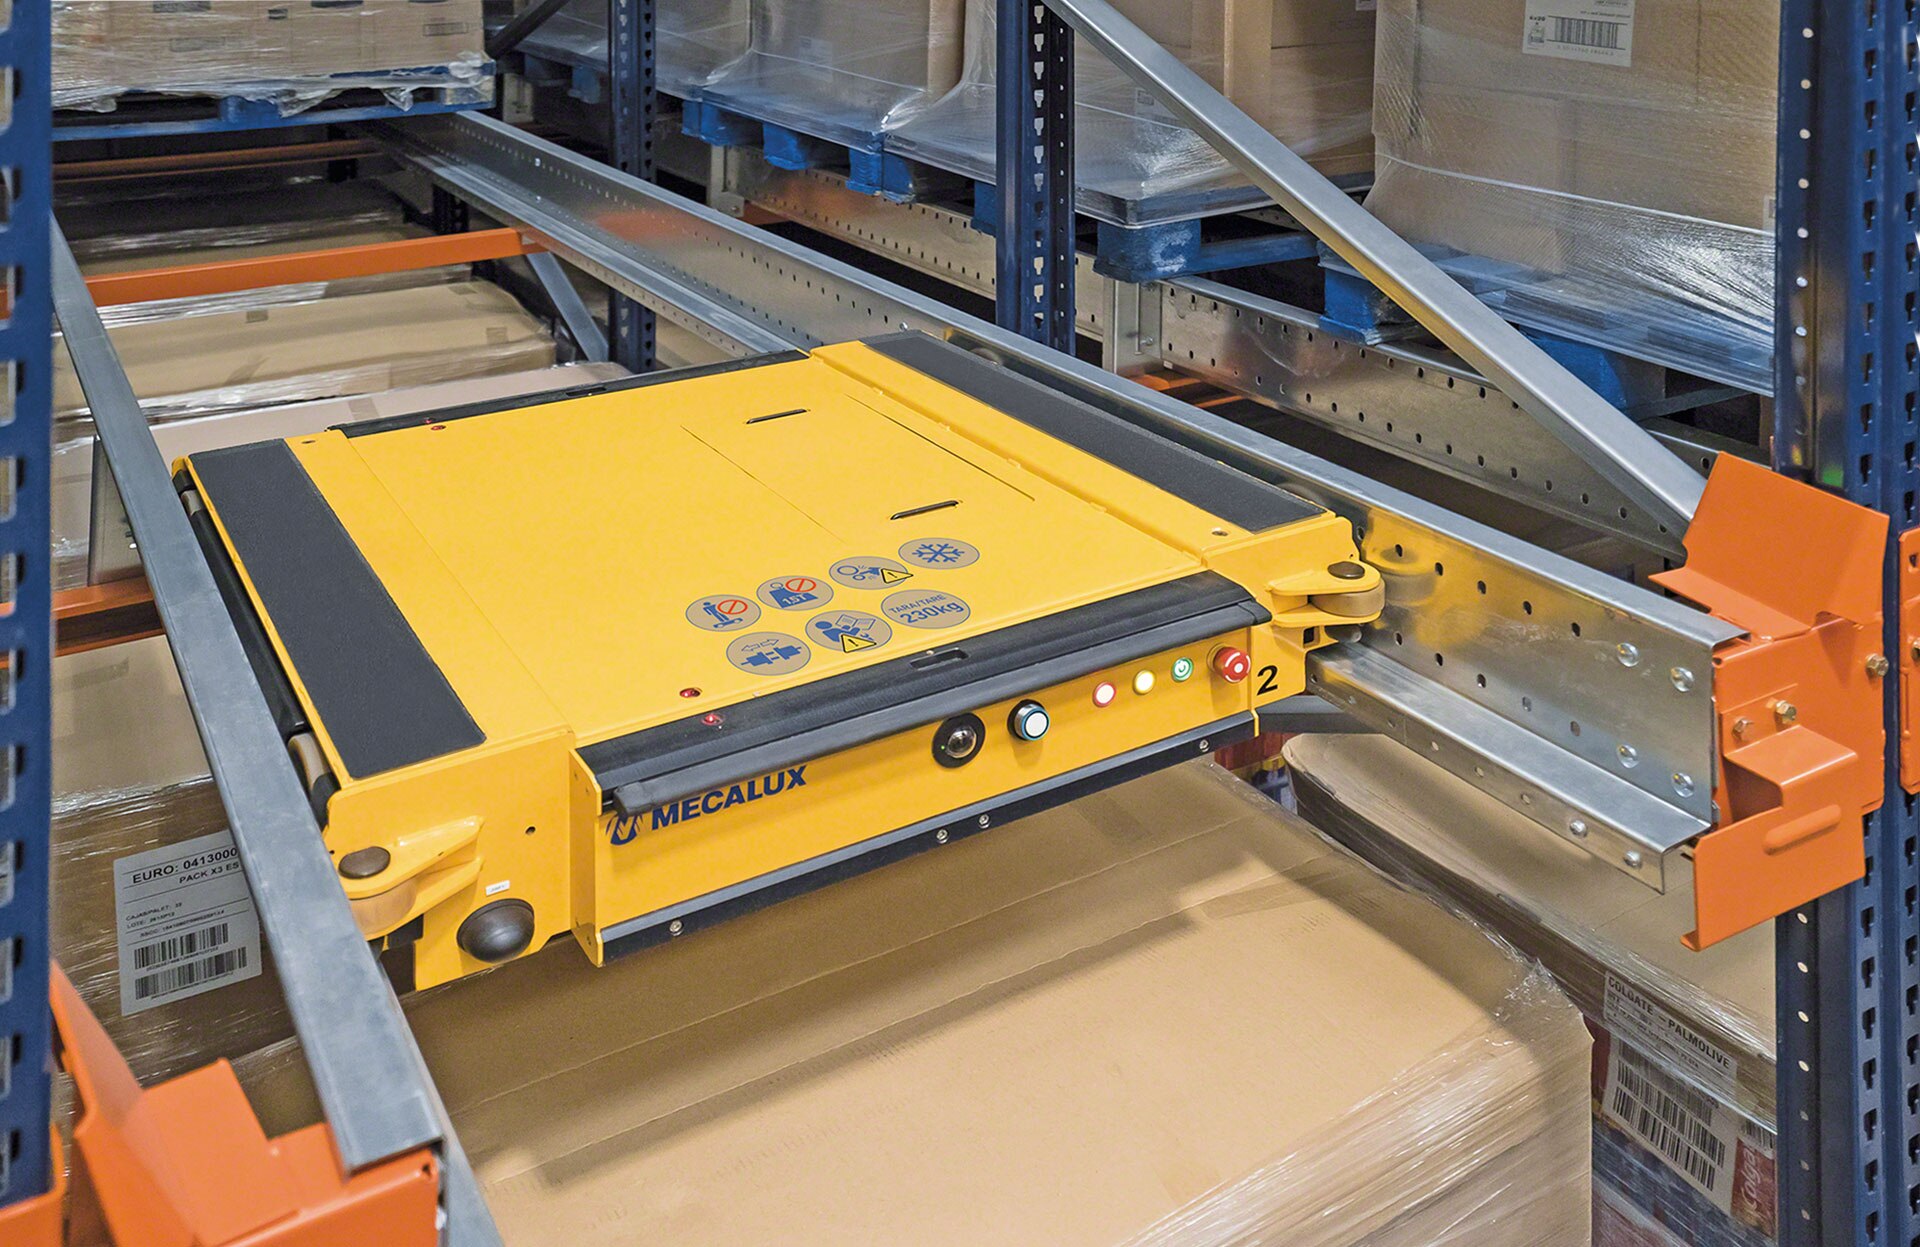 The Pallet Shuttle car runs inside the racking storage channels by means of support rails